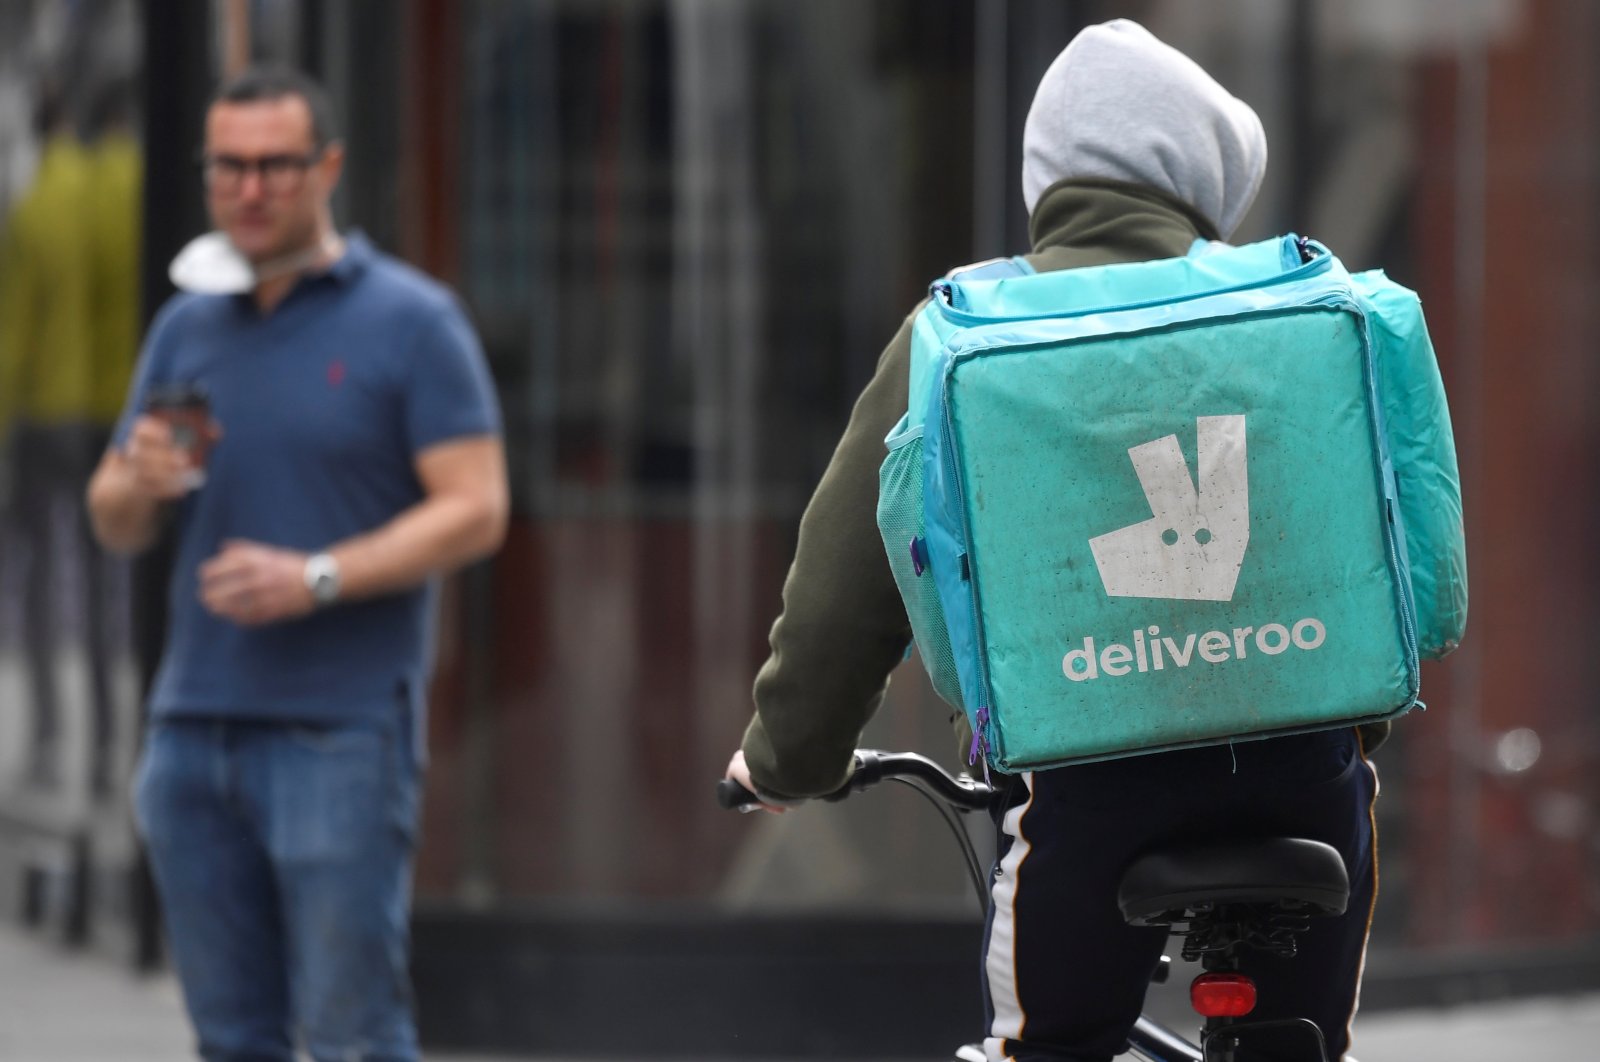 A Deliveroo delivery rider cycles in London, Britain, March 31, 2021. (REUTERS Photo)